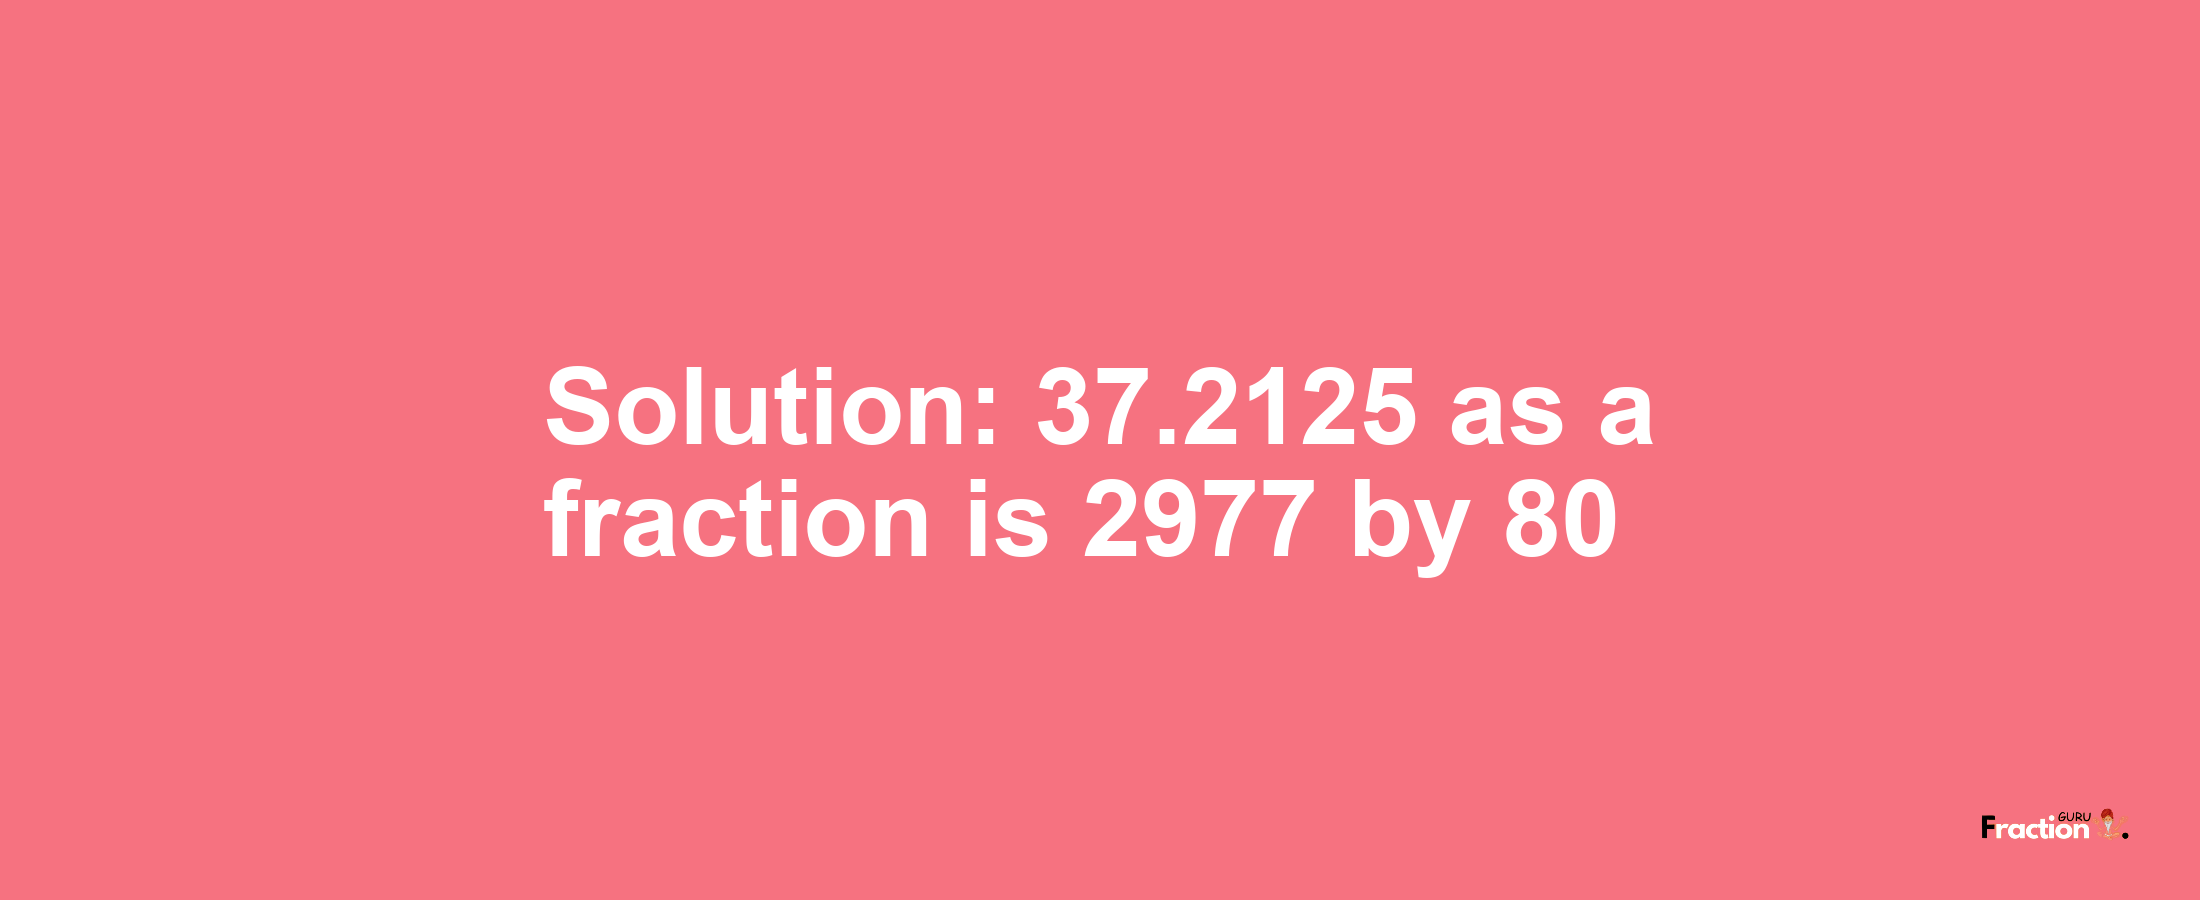 Solution:37.2125 as a fraction is 2977/80